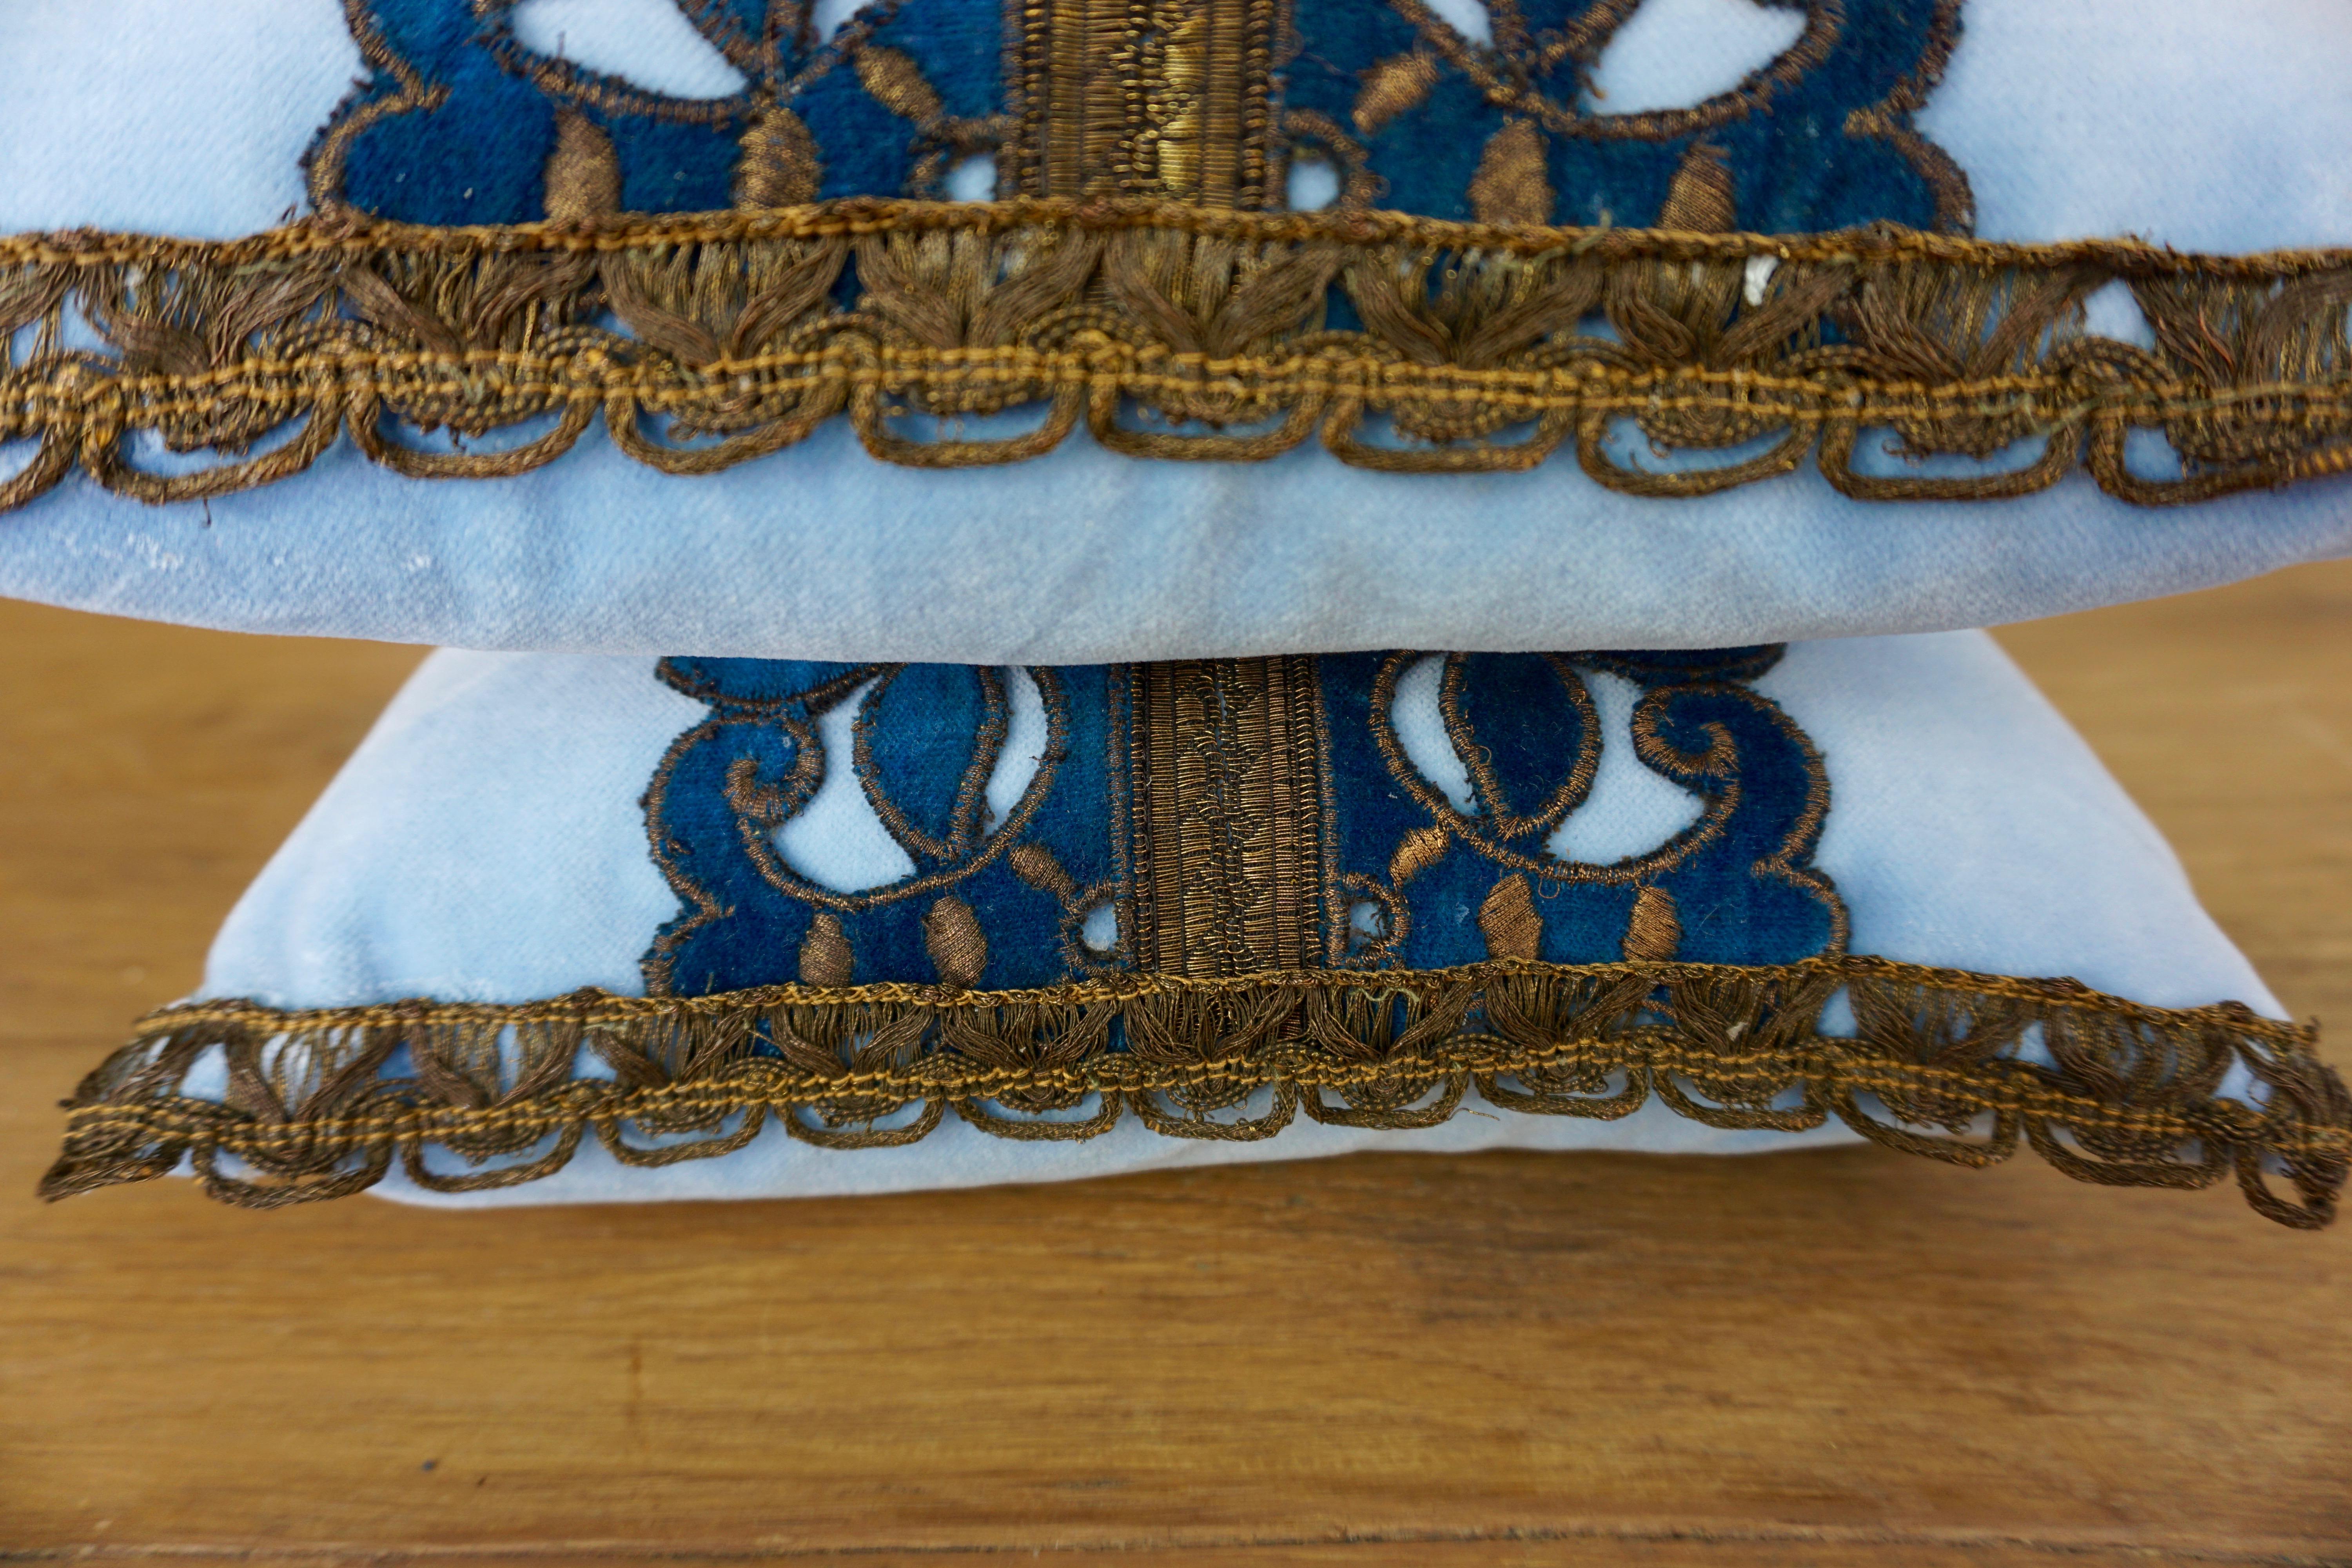 Pair of custom accent pillows designed by Melissa Levinson Antiques. The pillows are made with 19th century metallic and velvet appliqués on sky blue velvet fronts and backs. Down inserts, zipper closures.